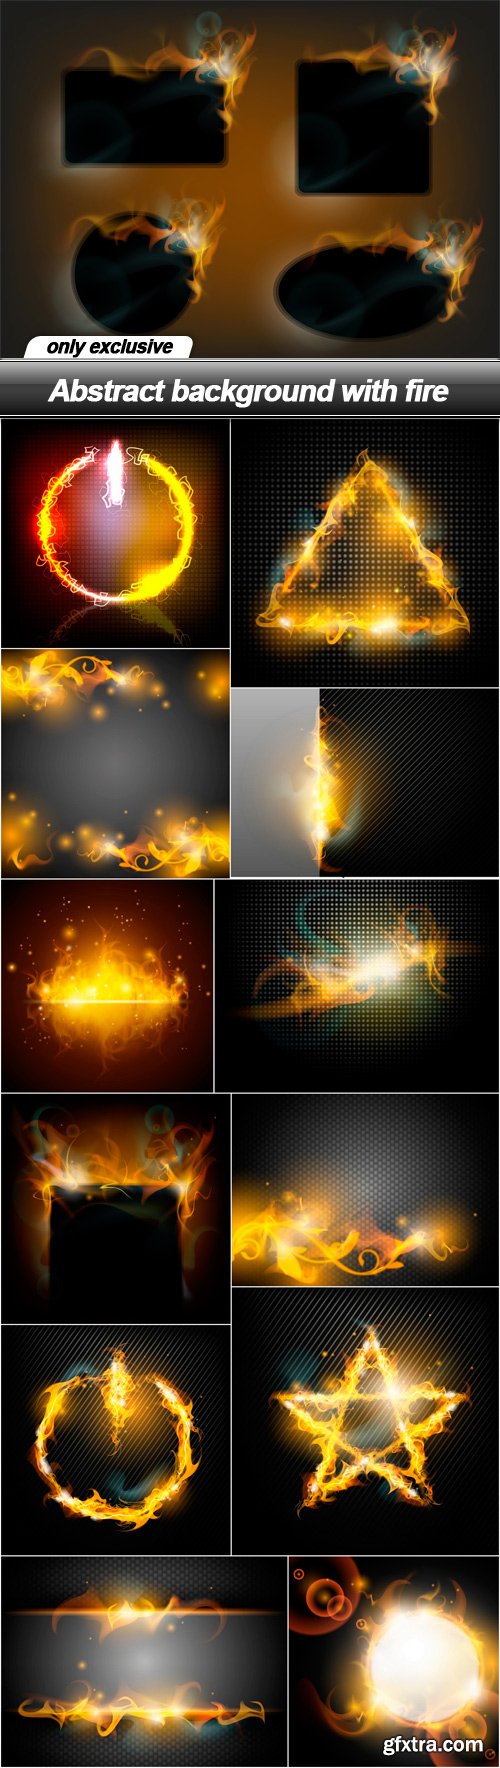 Abstract background with fire - 13 EPS